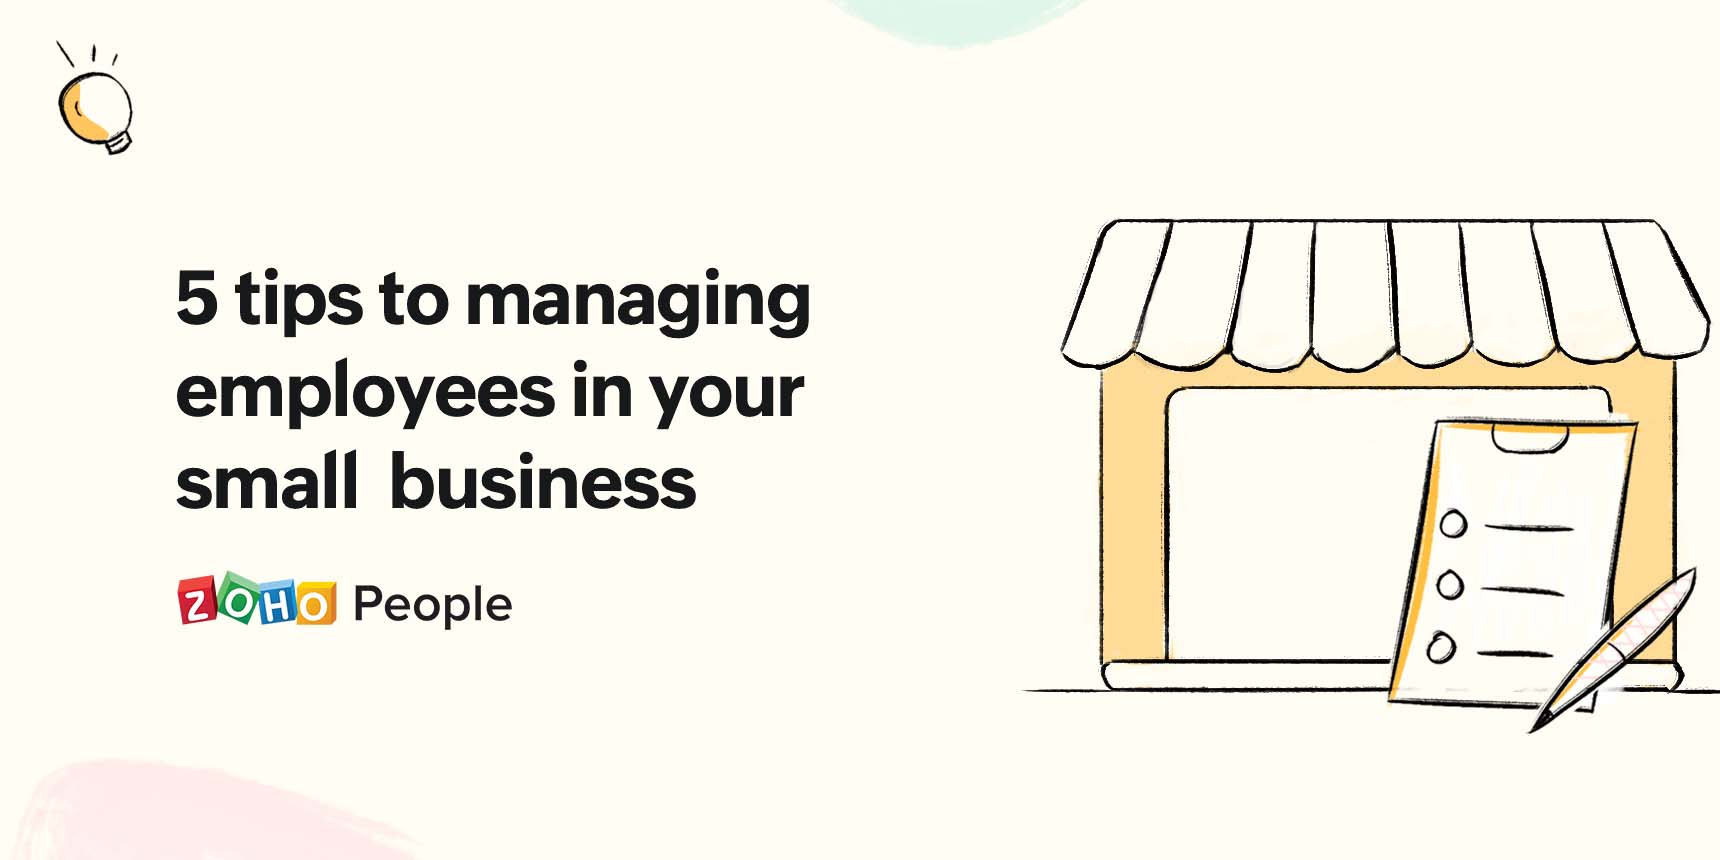 Here's how small business owners can manage their workforce effectively